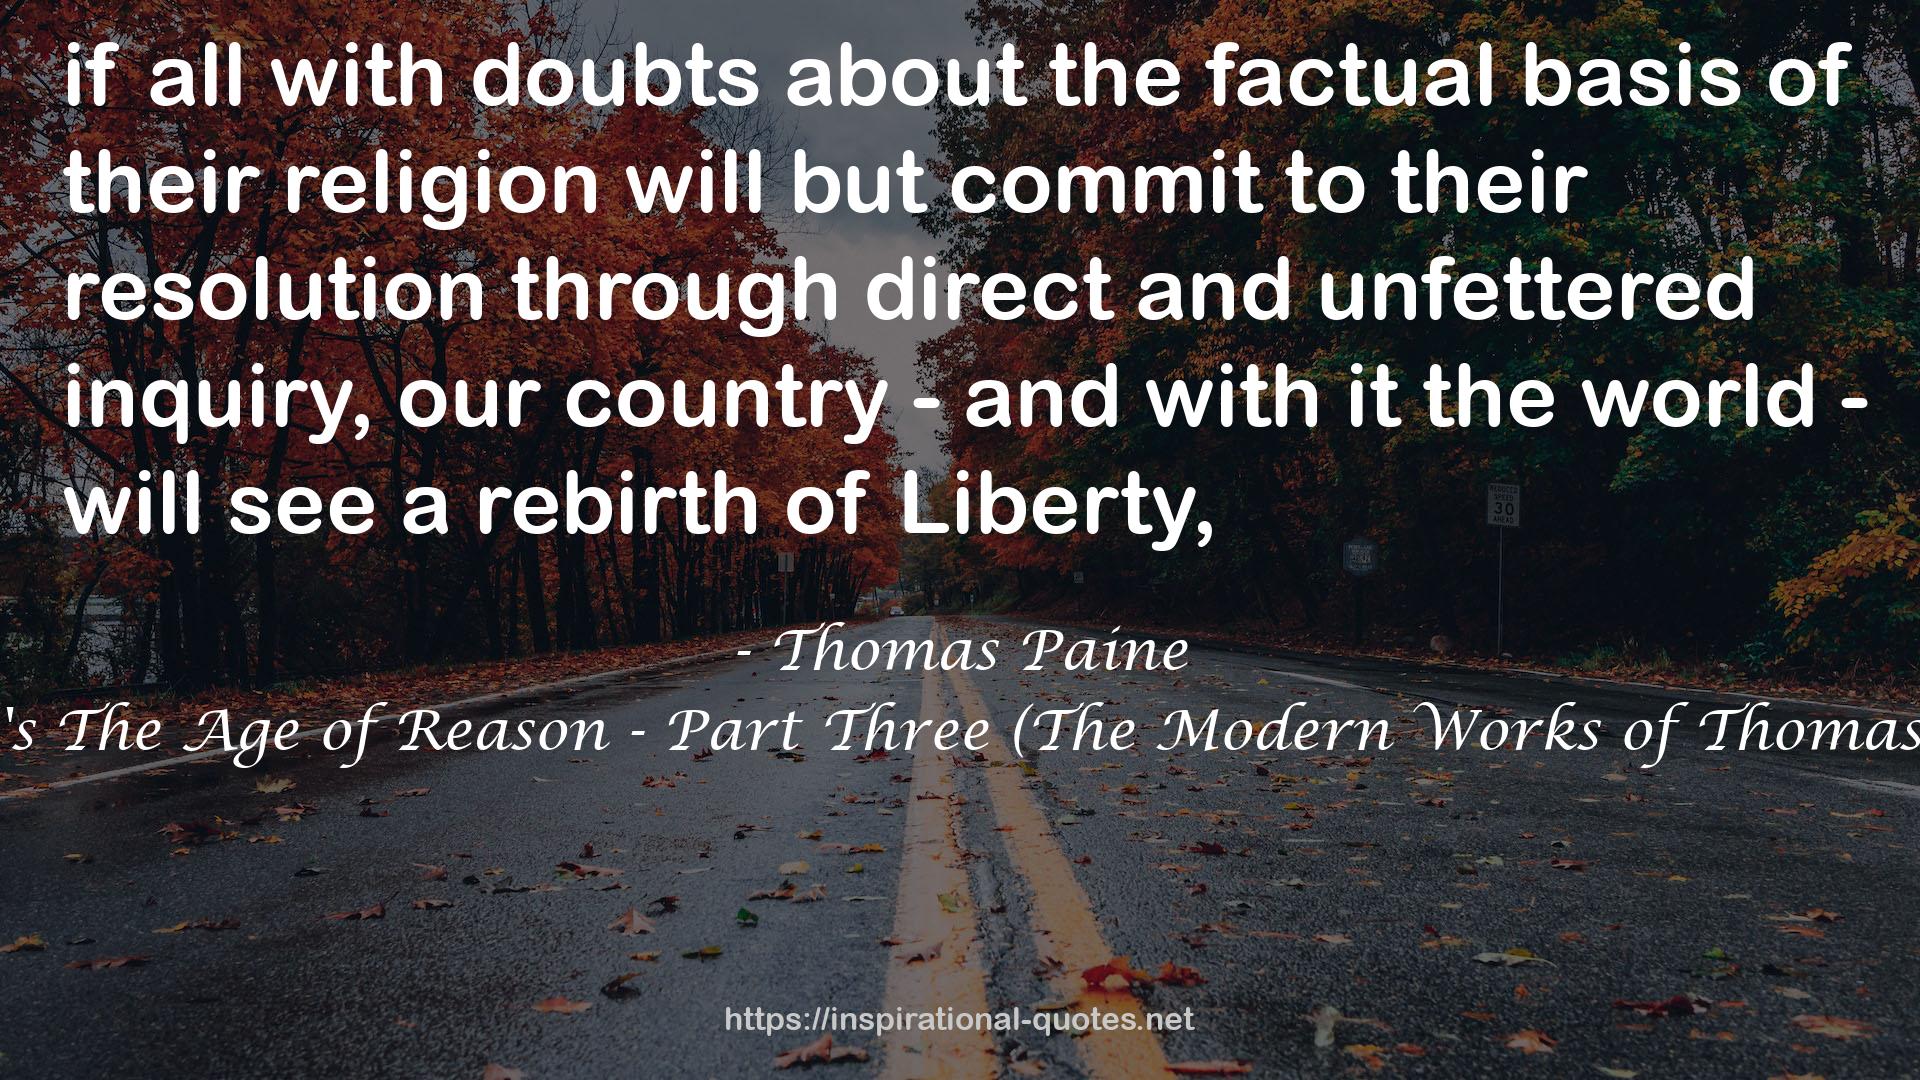 Thomas Paine's The Age of Reason - Part Three (The Modern Works of Thomas Paine Book 1) QUOTES